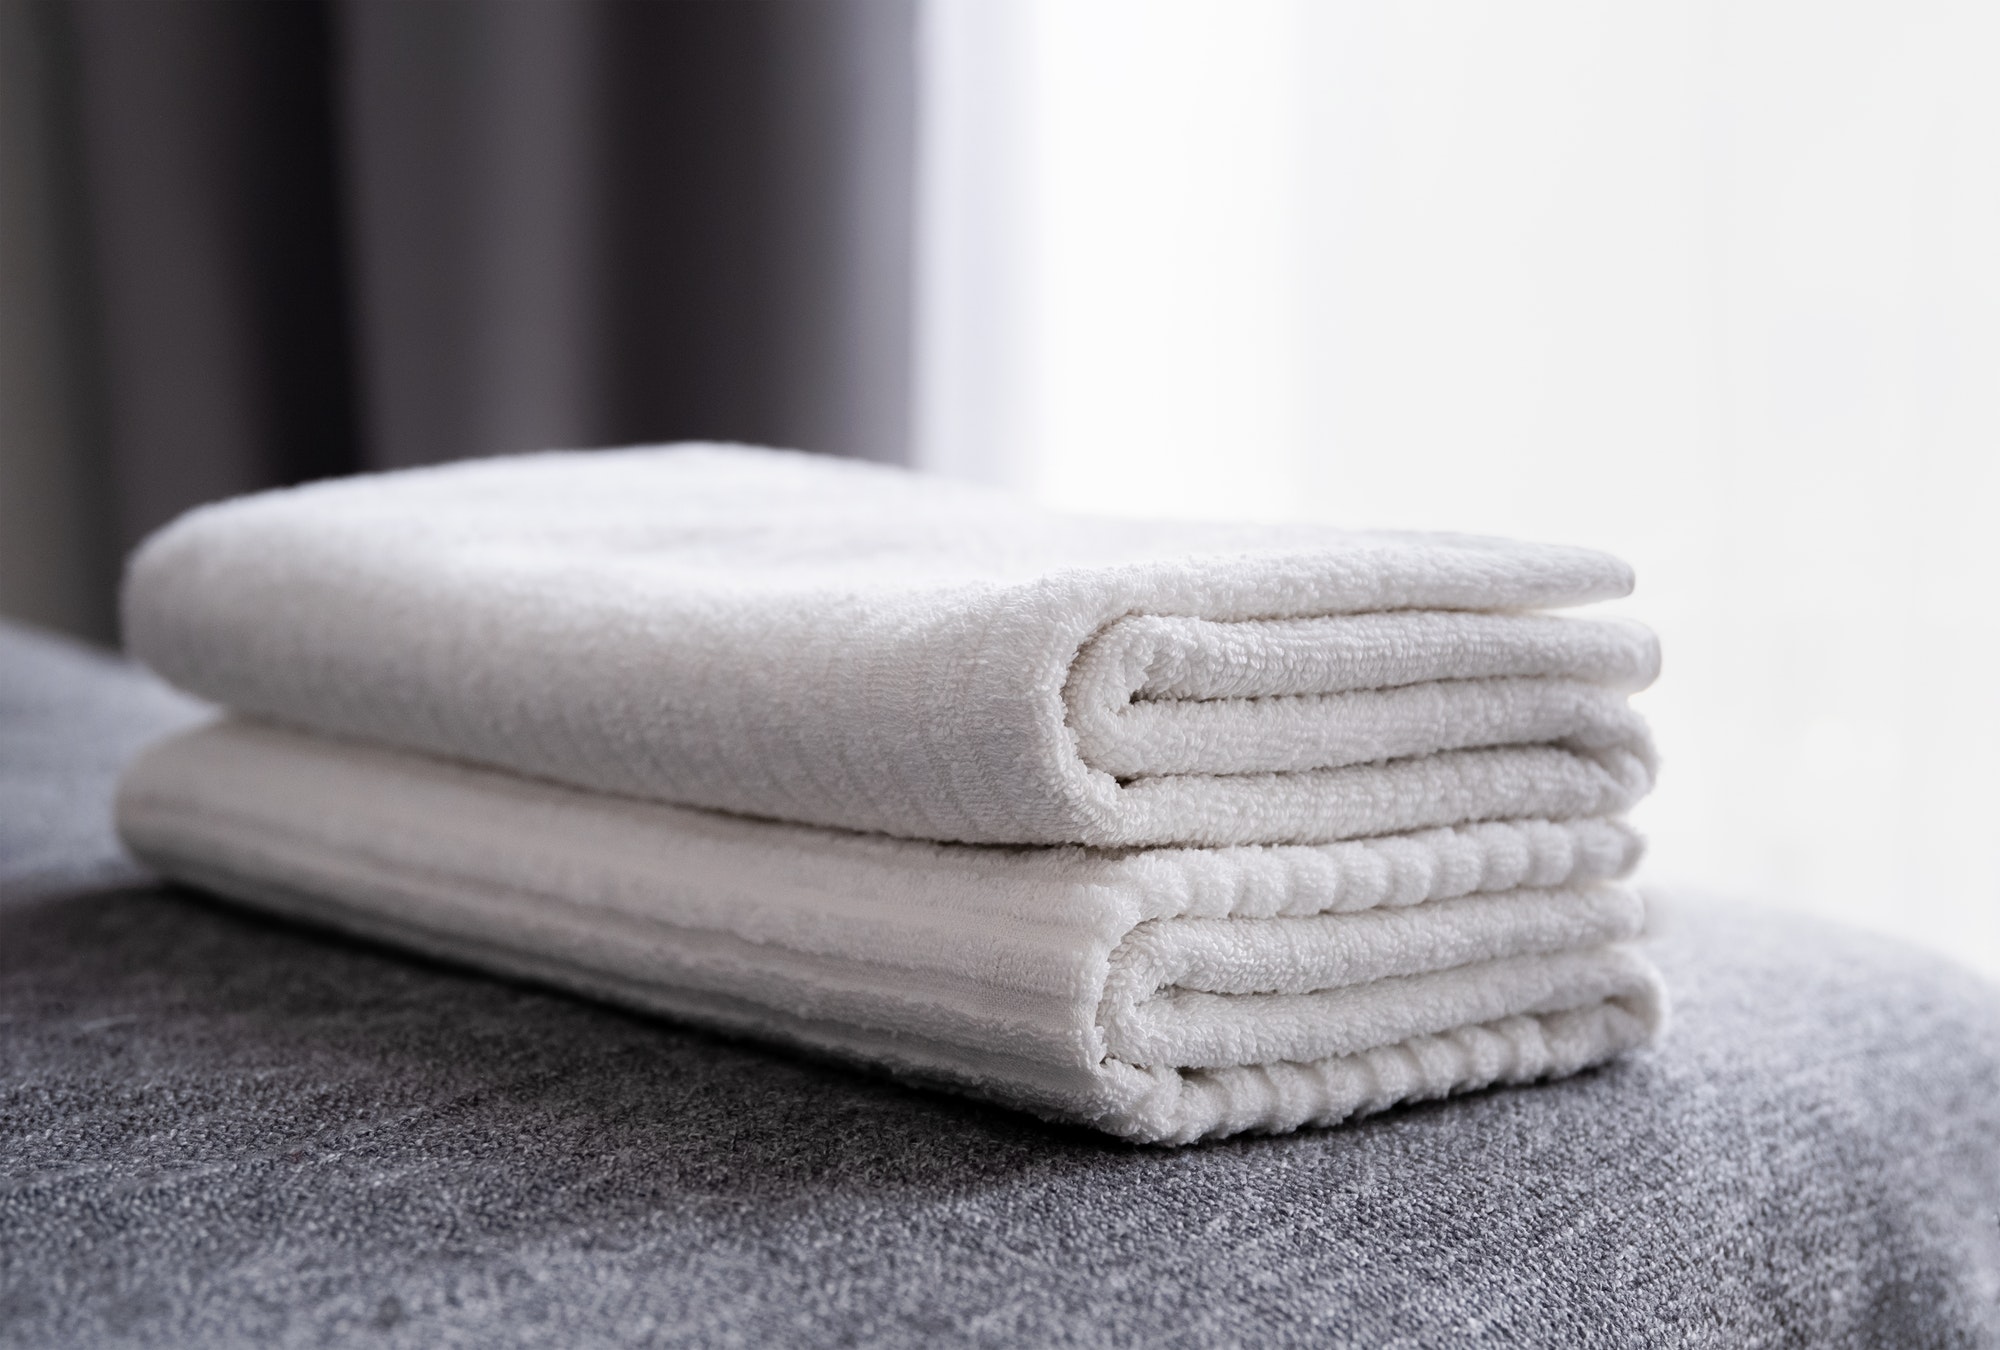 Hotel staff, fresh white bath towels on the bed.